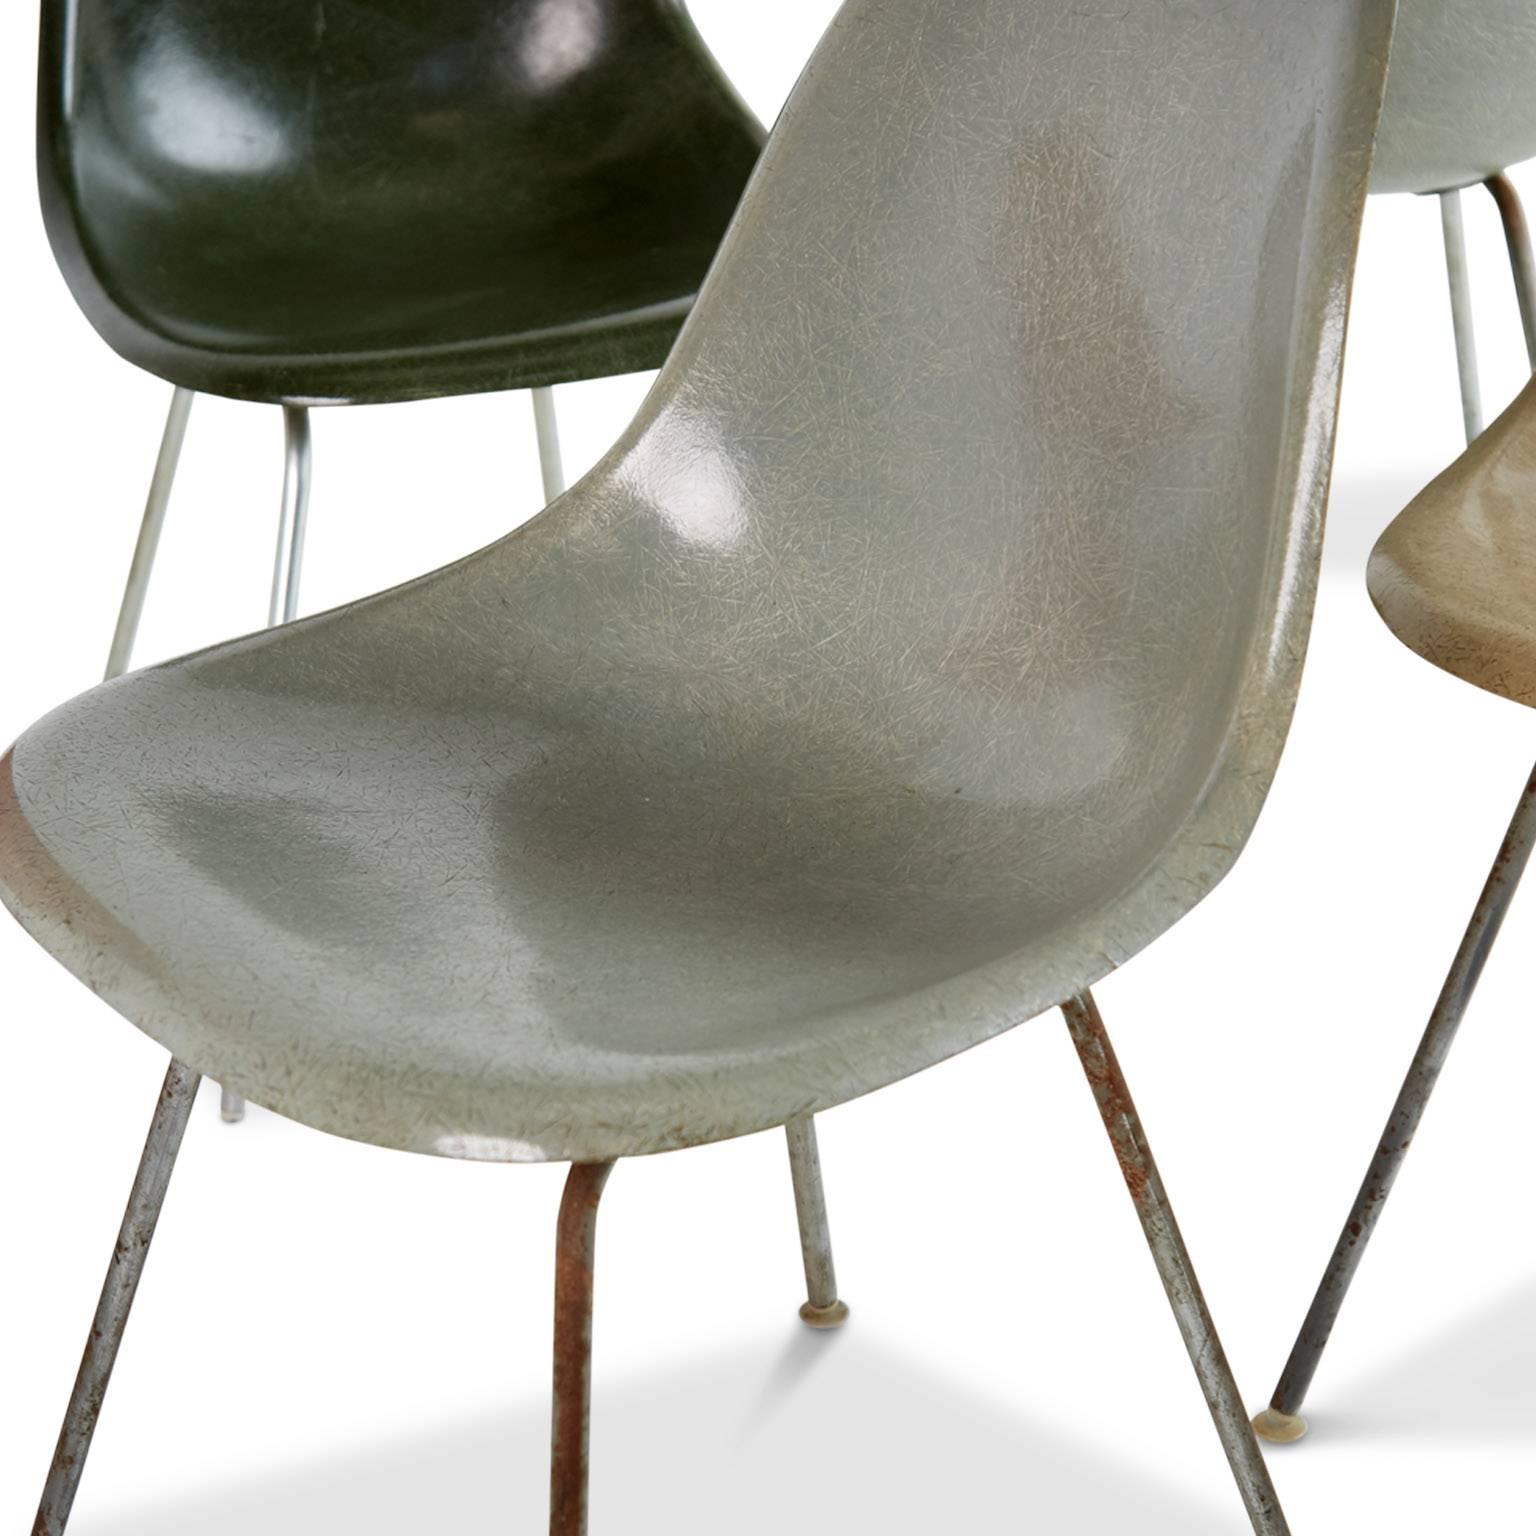 Mid-20th Century Charles & Ray Eames for Herman Miller Fiberglass DSX Chairs, Early Production